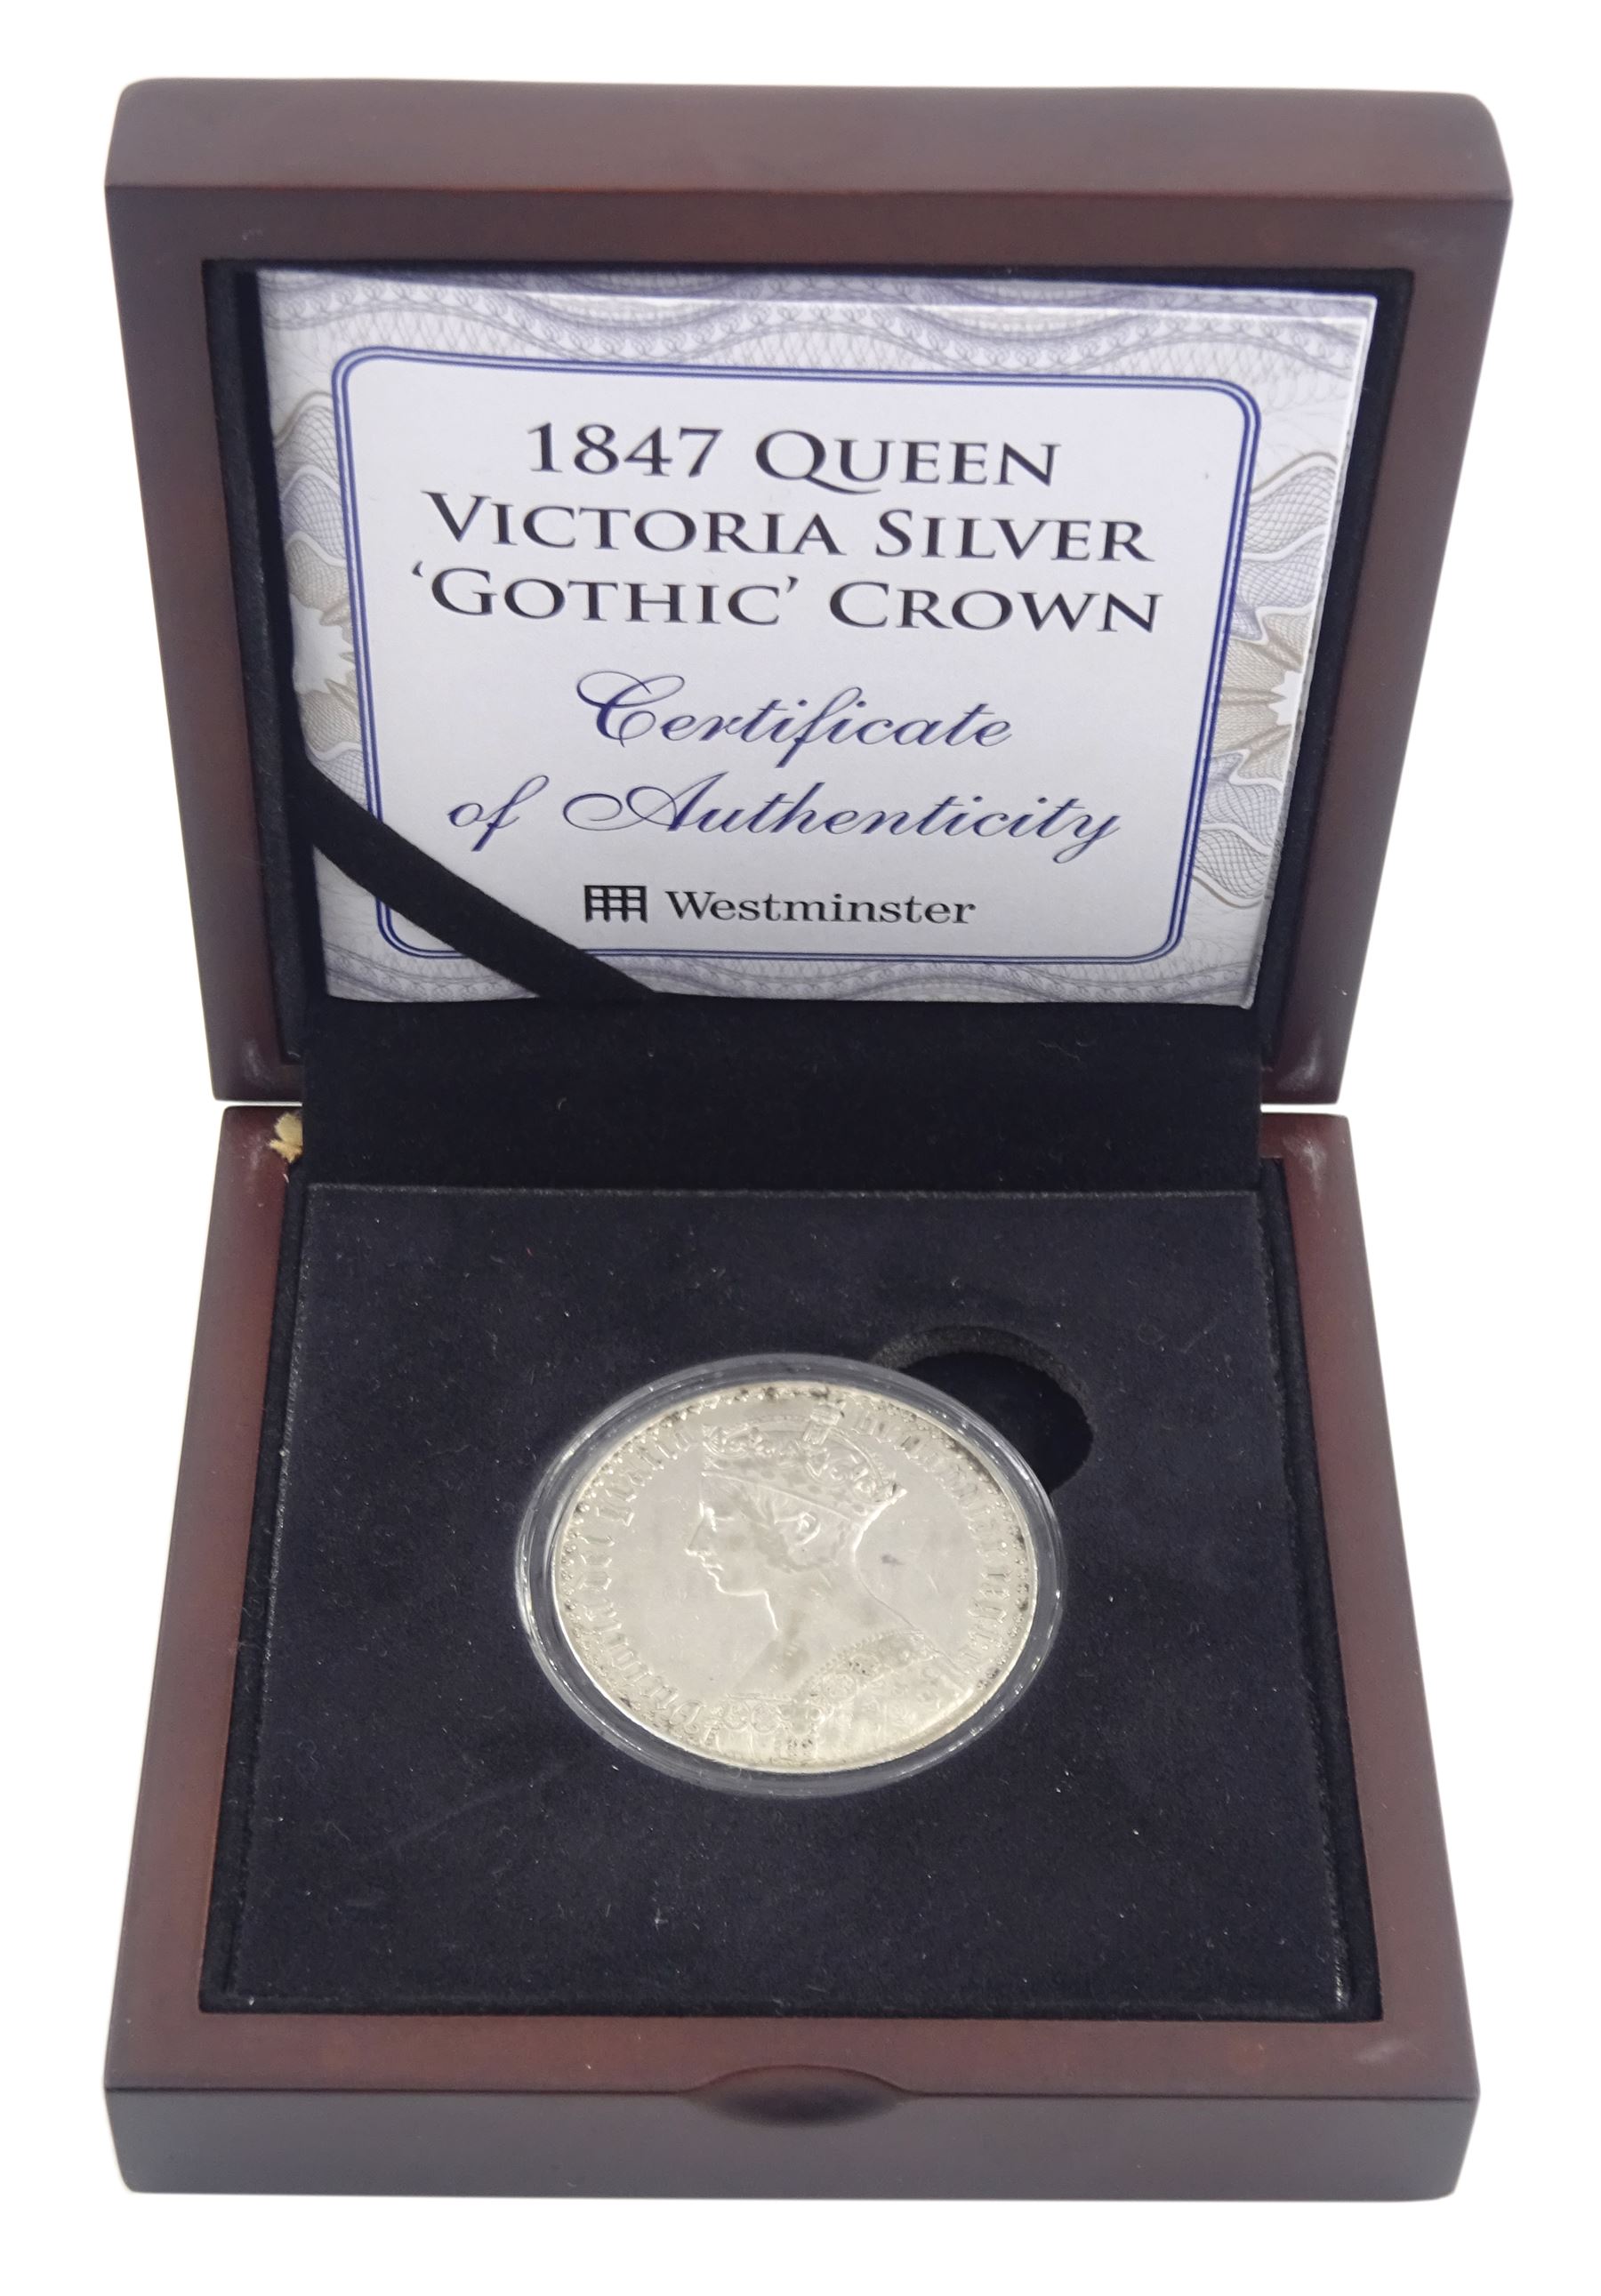 Queen Victoria 1847 Gothic crown coin - Image 3 of 3